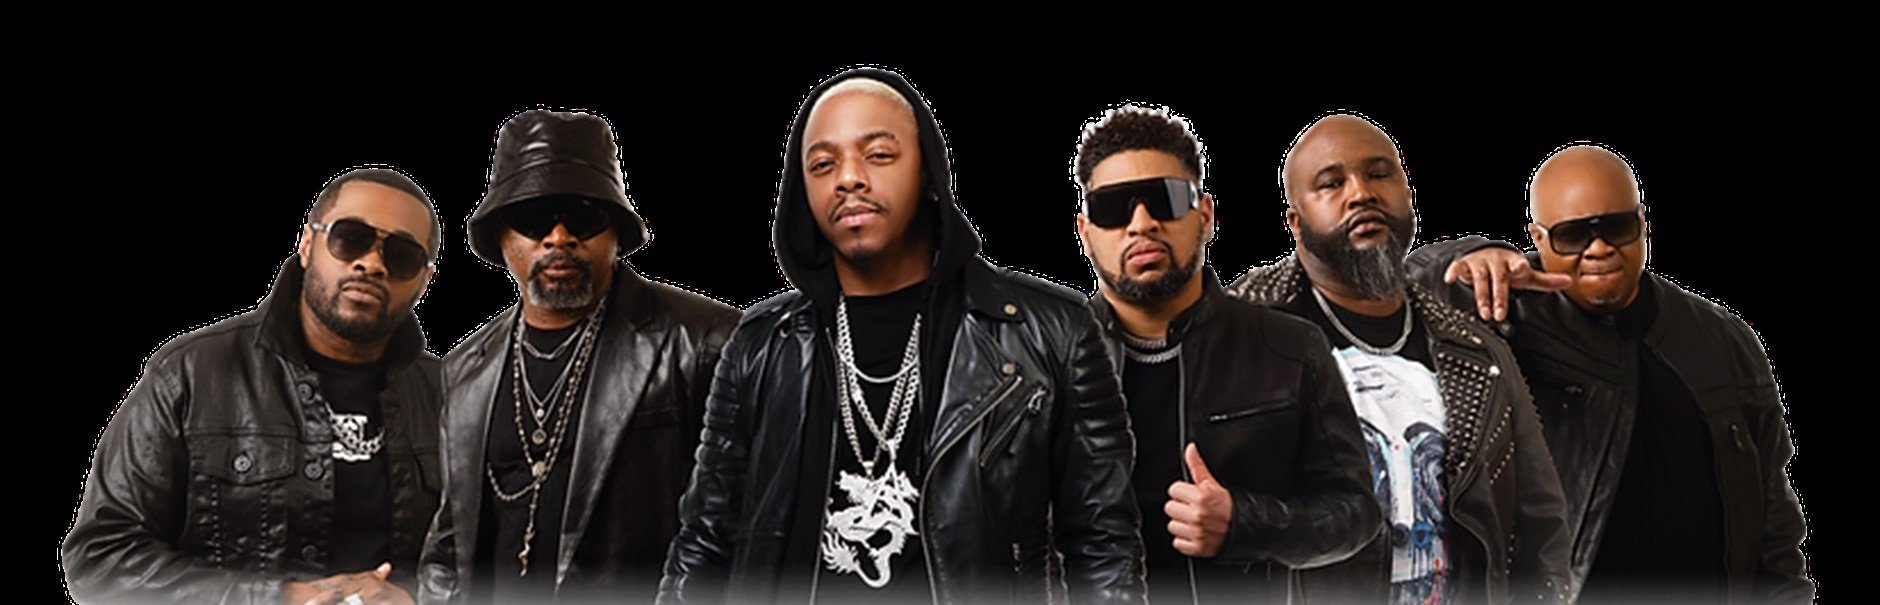 Dru Hill will head to South African shores for a one-night show this September